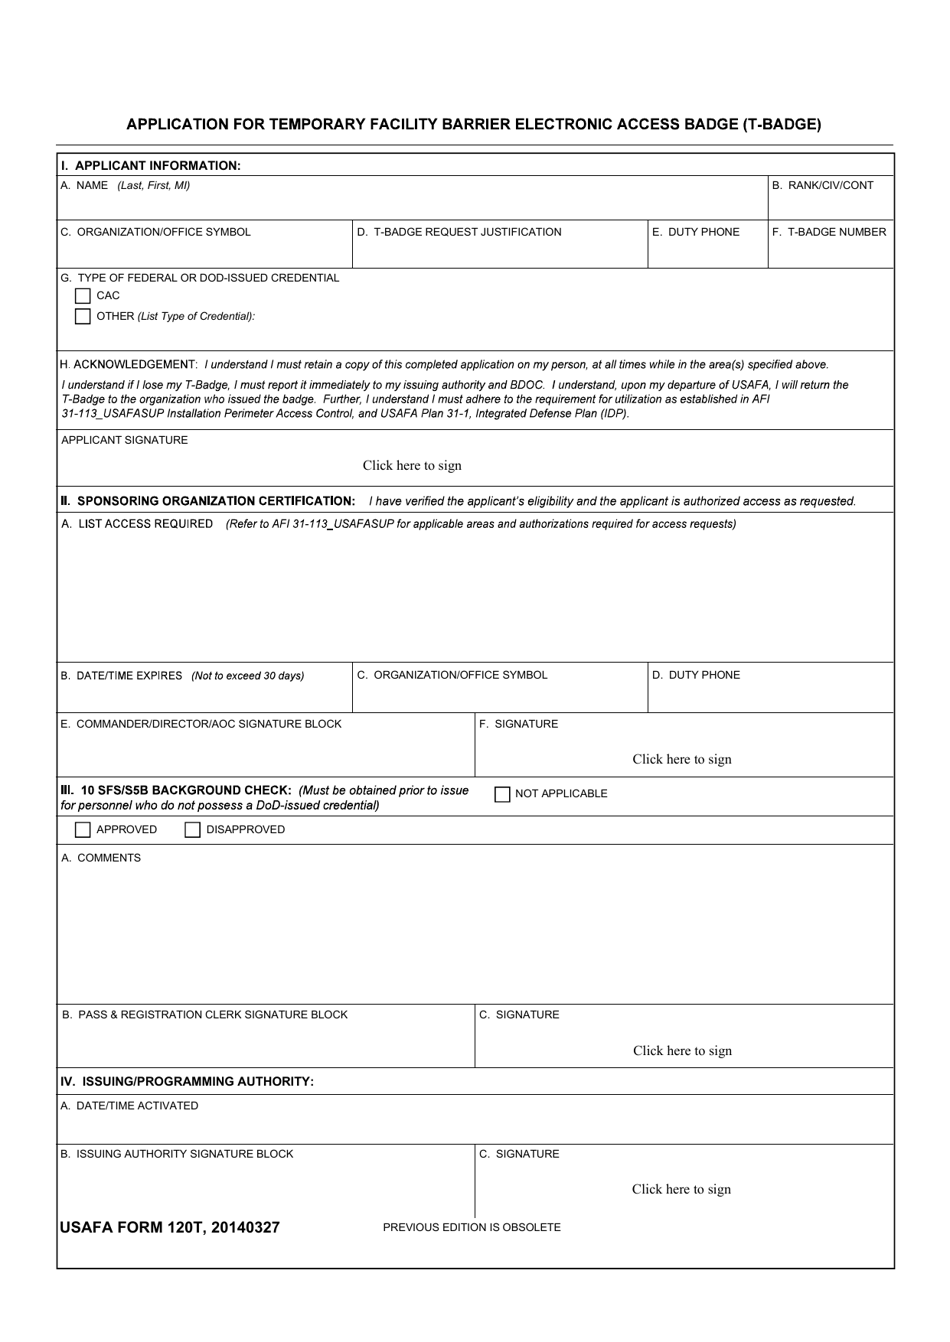 USAFA Form 120T Application for Temporary Facility Barrier Electronic Access (T-Badge), Page 1